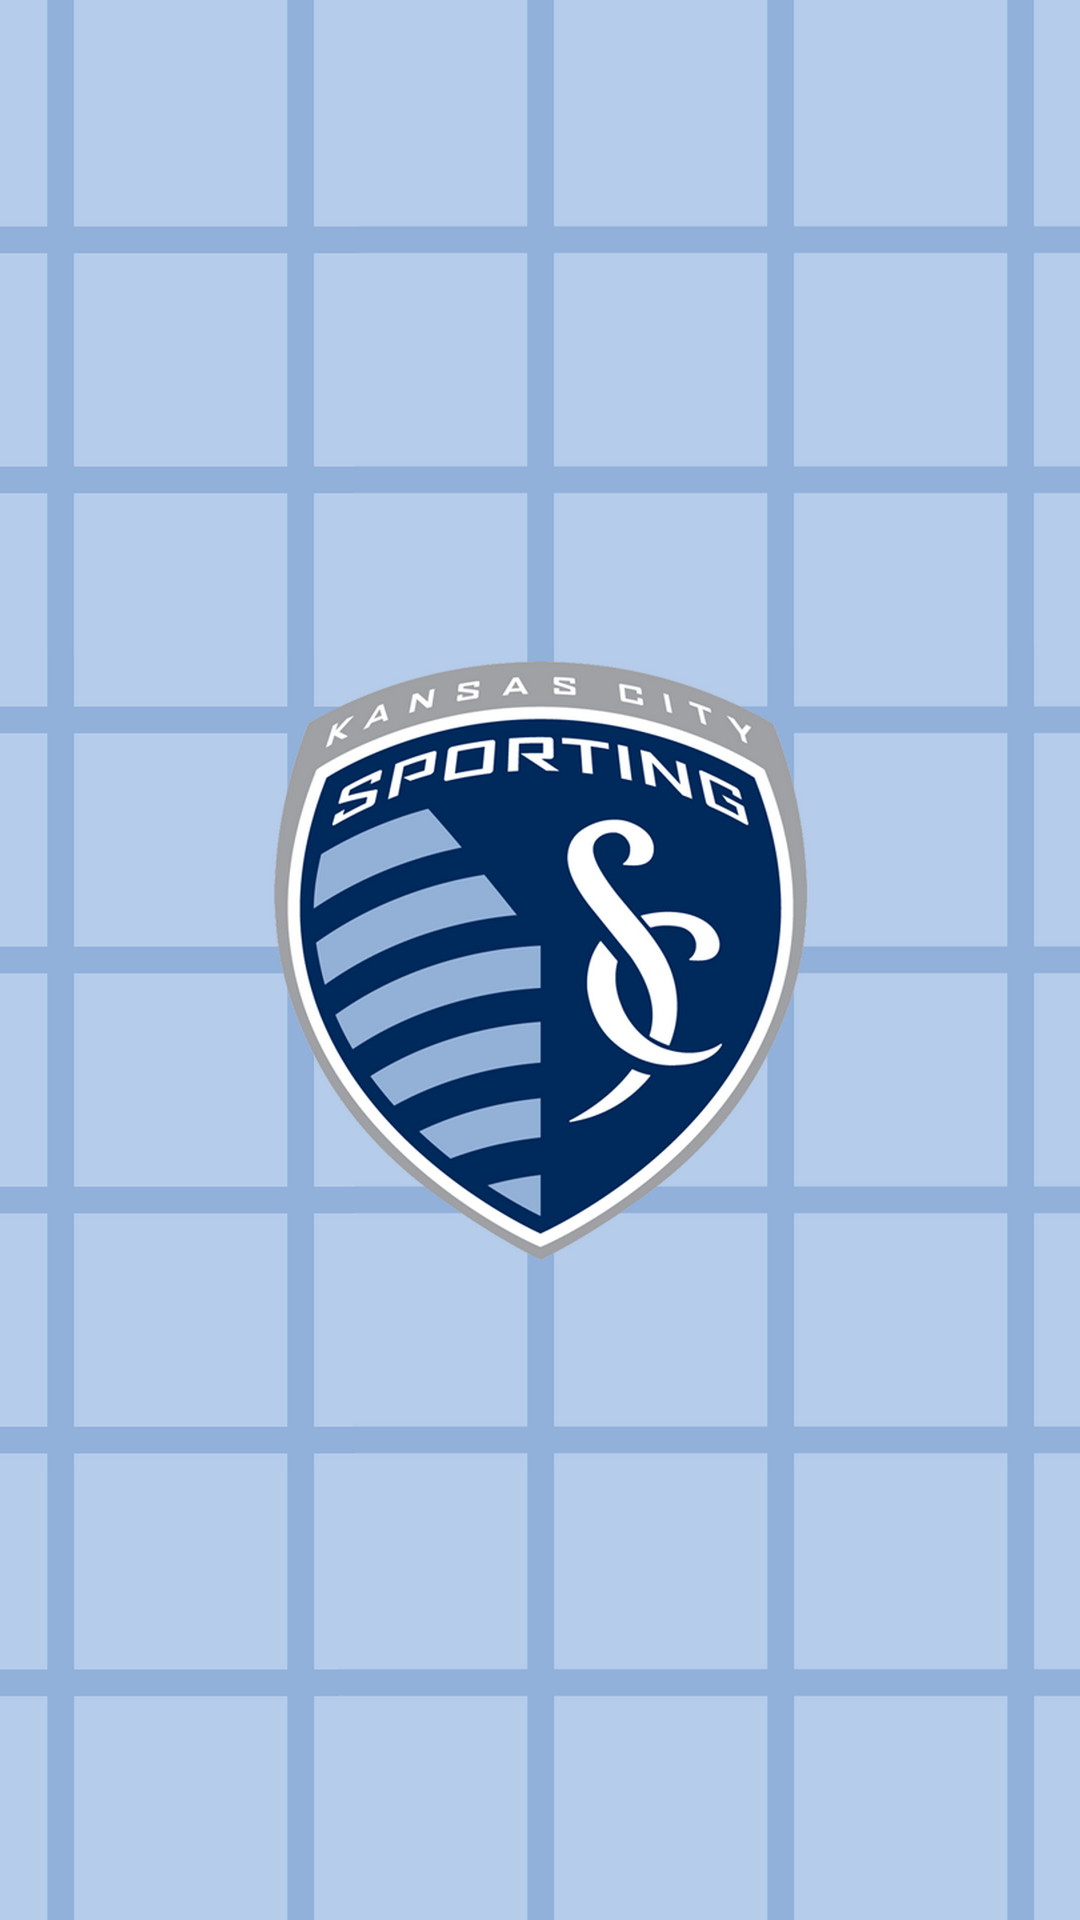 Sporting Kansas City Mobile Wallpaper HD with high-resolution 1080x1920 pixel. You can use this wallpaper for your Desktop Computers, Mac Screensavers, Windows Backgrounds, iPhone Wallpapers, Tablet or Android Lock screen and another Mobile device